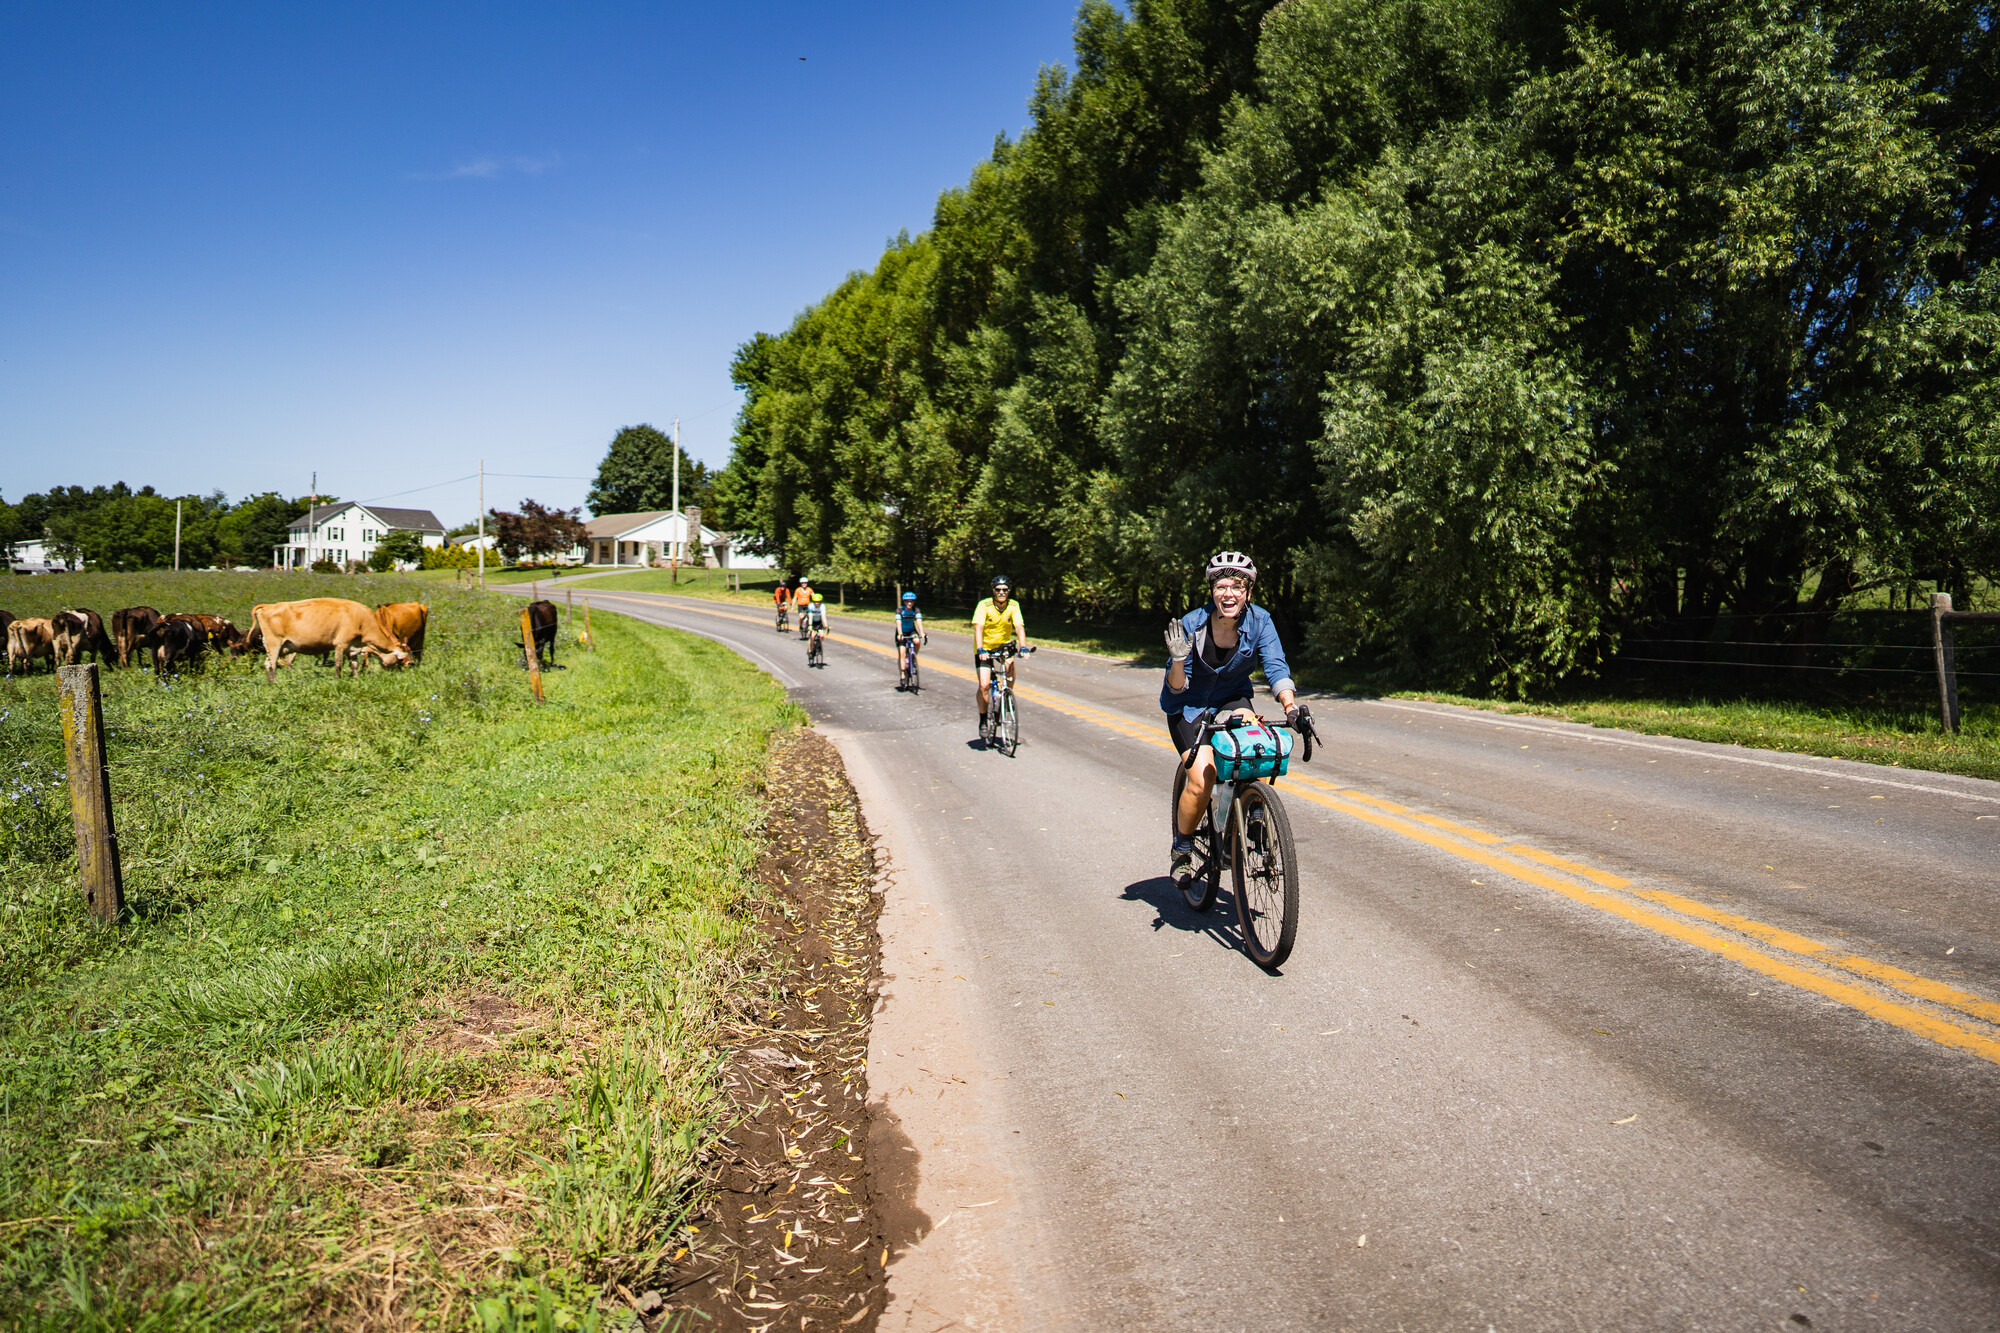 A group of cyclists biking down a country road beside a field of cows. The lead cyclist waves at the camera.